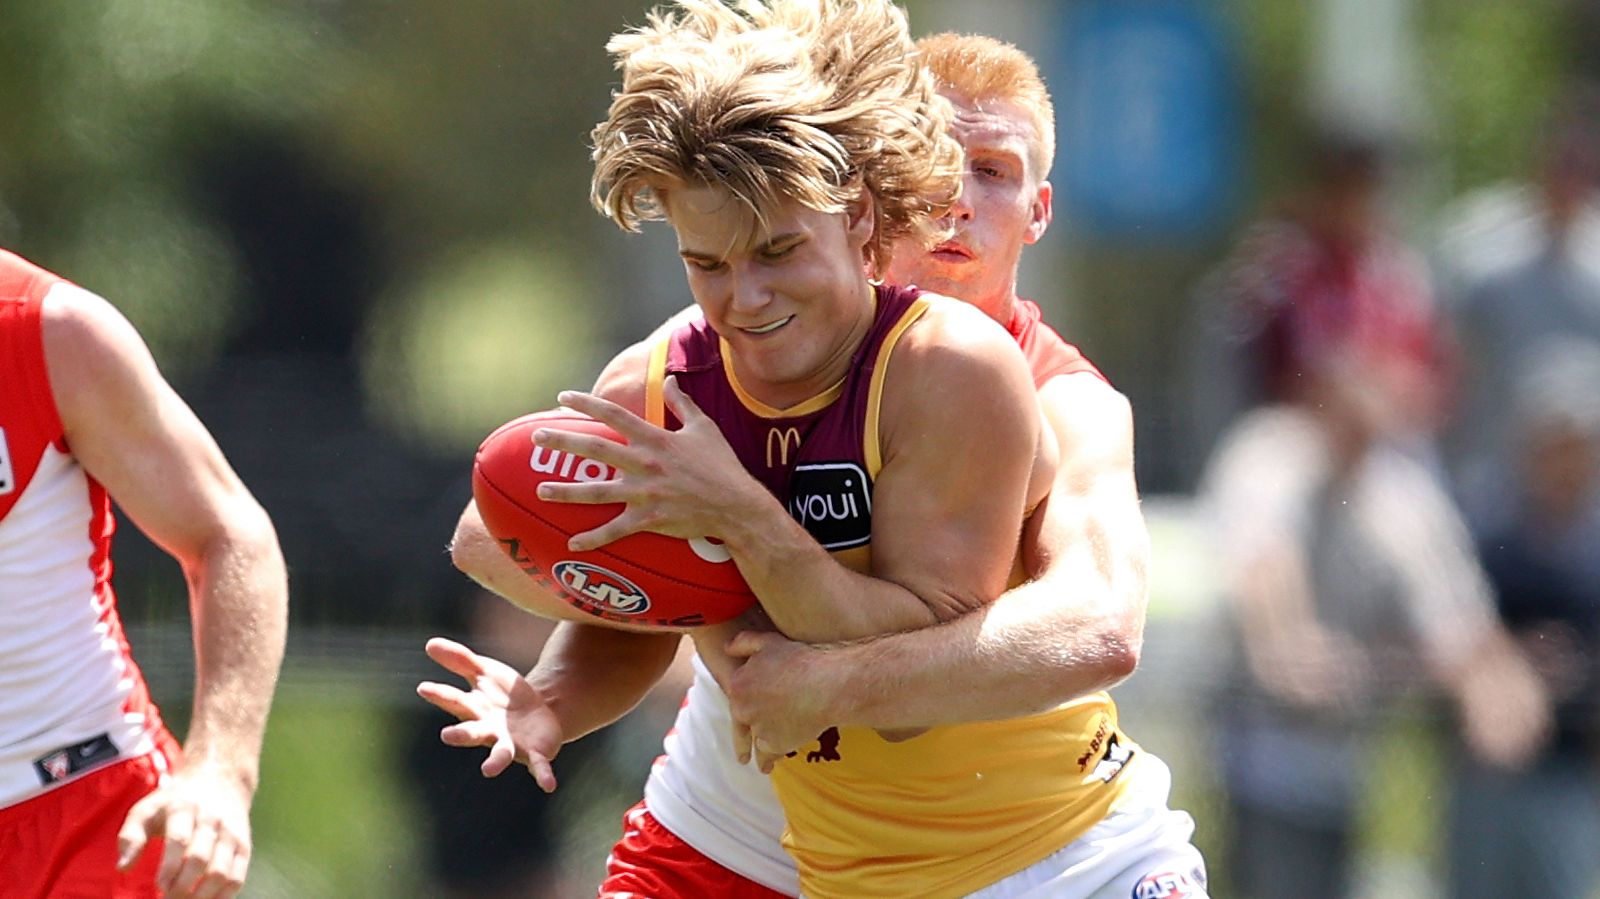 Will Ashcroft of the Lions competes with Jordan Dawson of the Swans during an AFL match simulation.